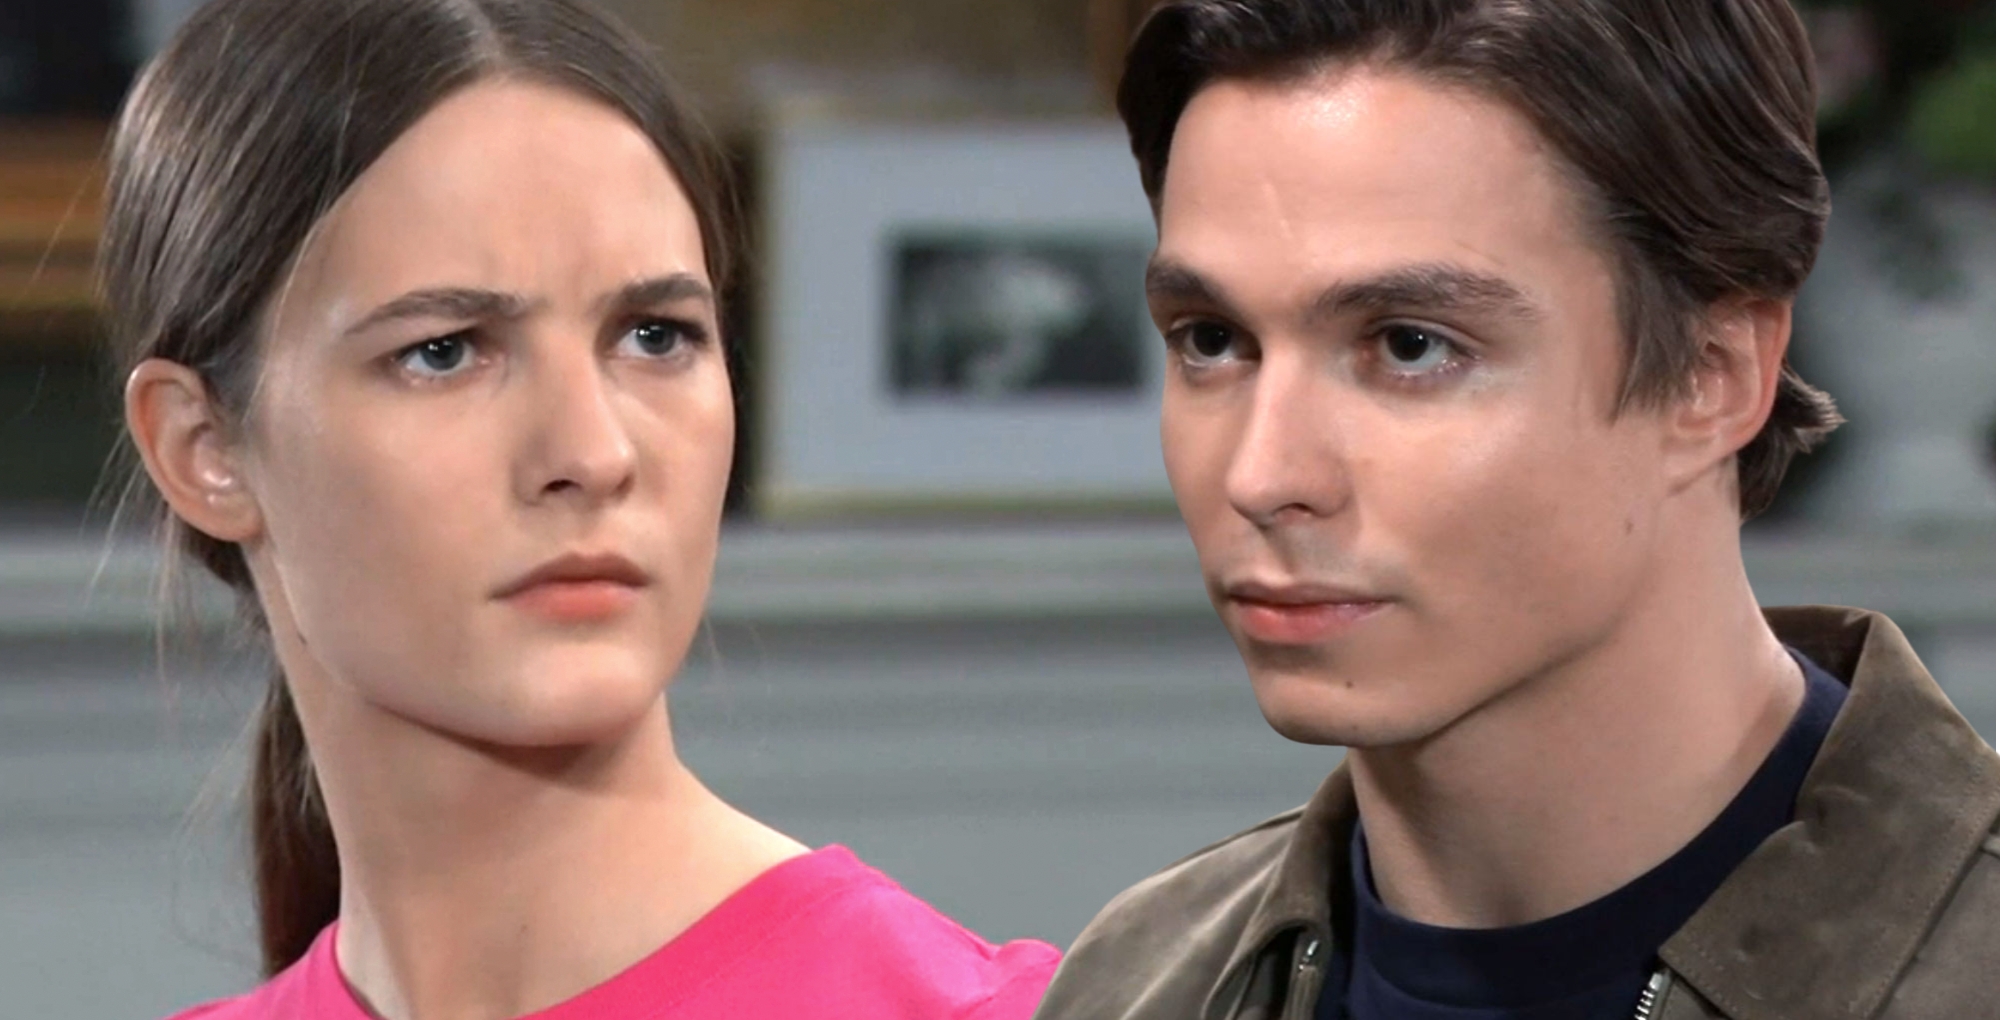 gh spoilers speculation about esme prince marrying spencer cassadine